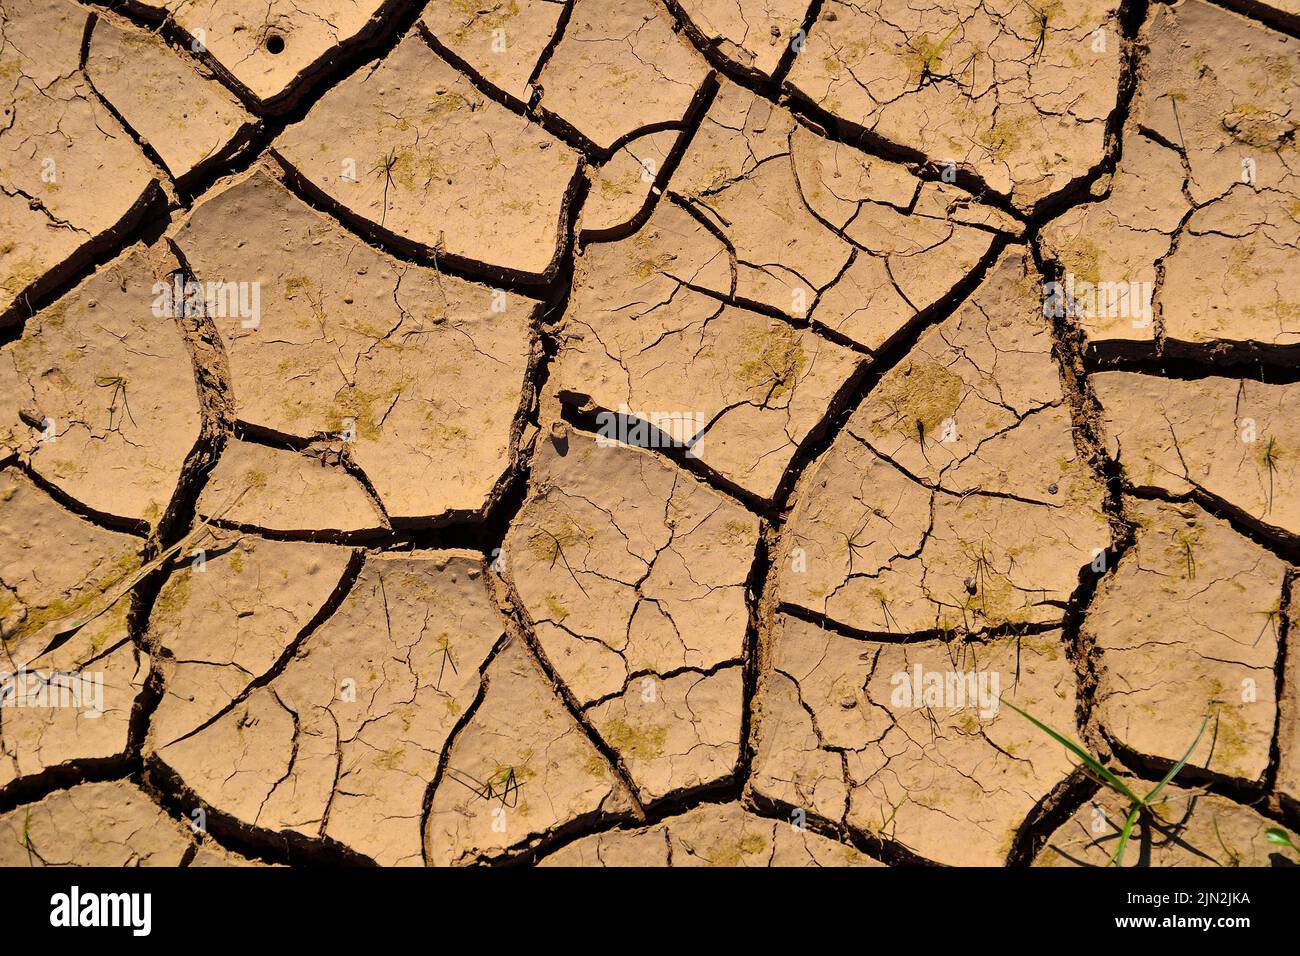 Dry cracked soil texture, drought - global warming and climate change concept. Arid clay ground. Danger of ecology disaster, food crisis and hunger. D Stock Photo